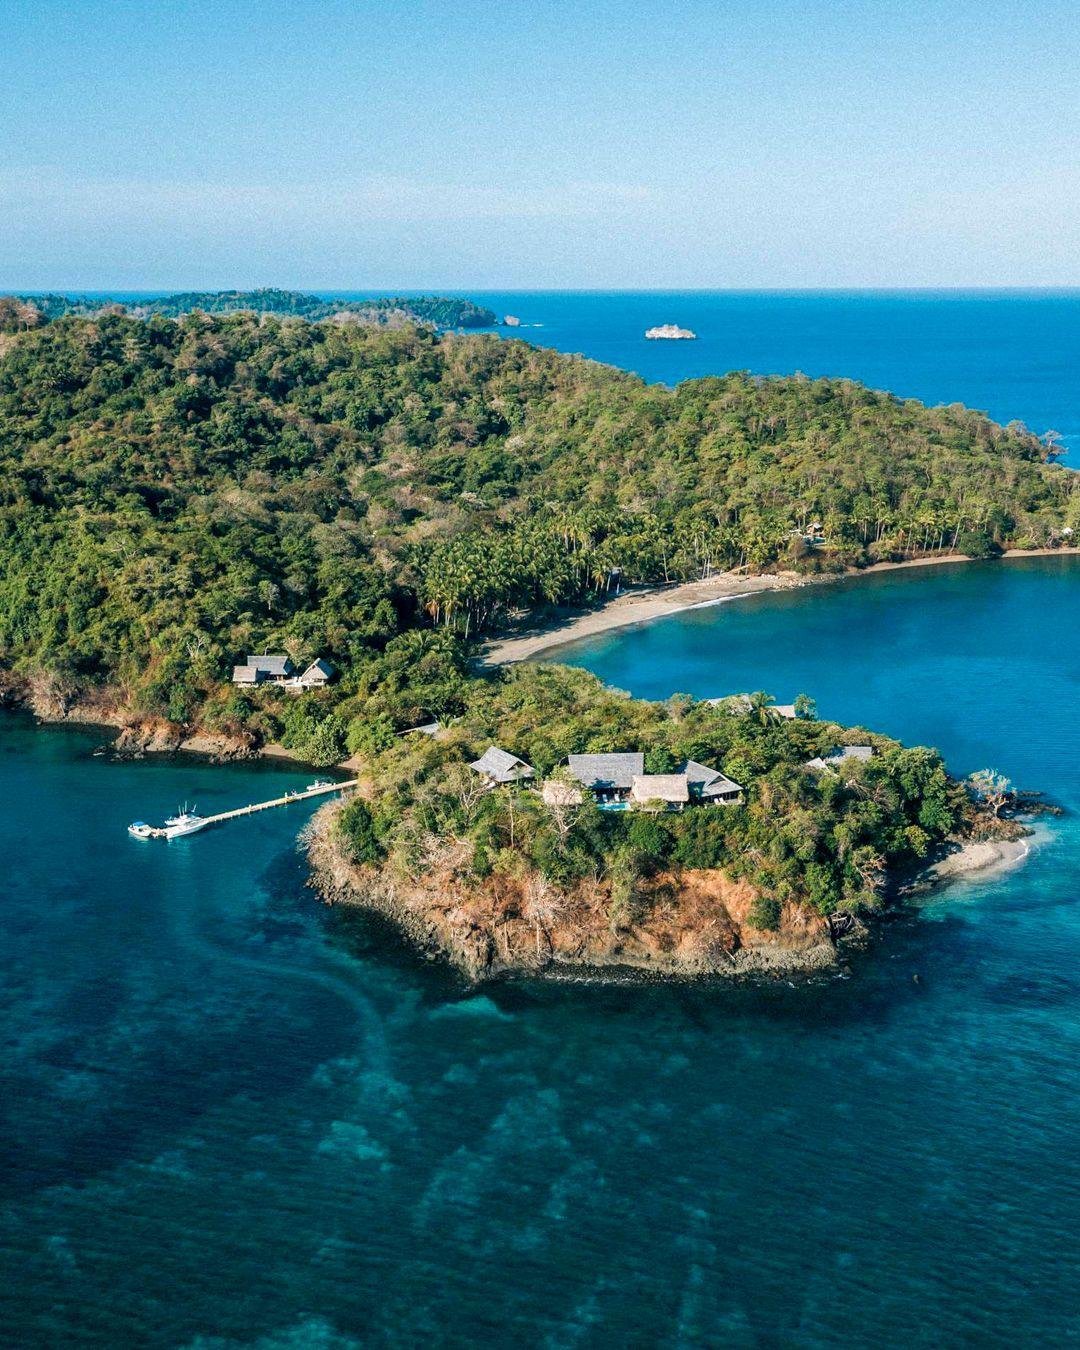 Bucket list destination: Islas Secas, Panama! 🌴☀️

Are you ready to explore an incredible private island? This idyllic destination combines the elegance of luxury with the purity of nature, all set along untouched beaches of the Caribbean Sea.

Why 